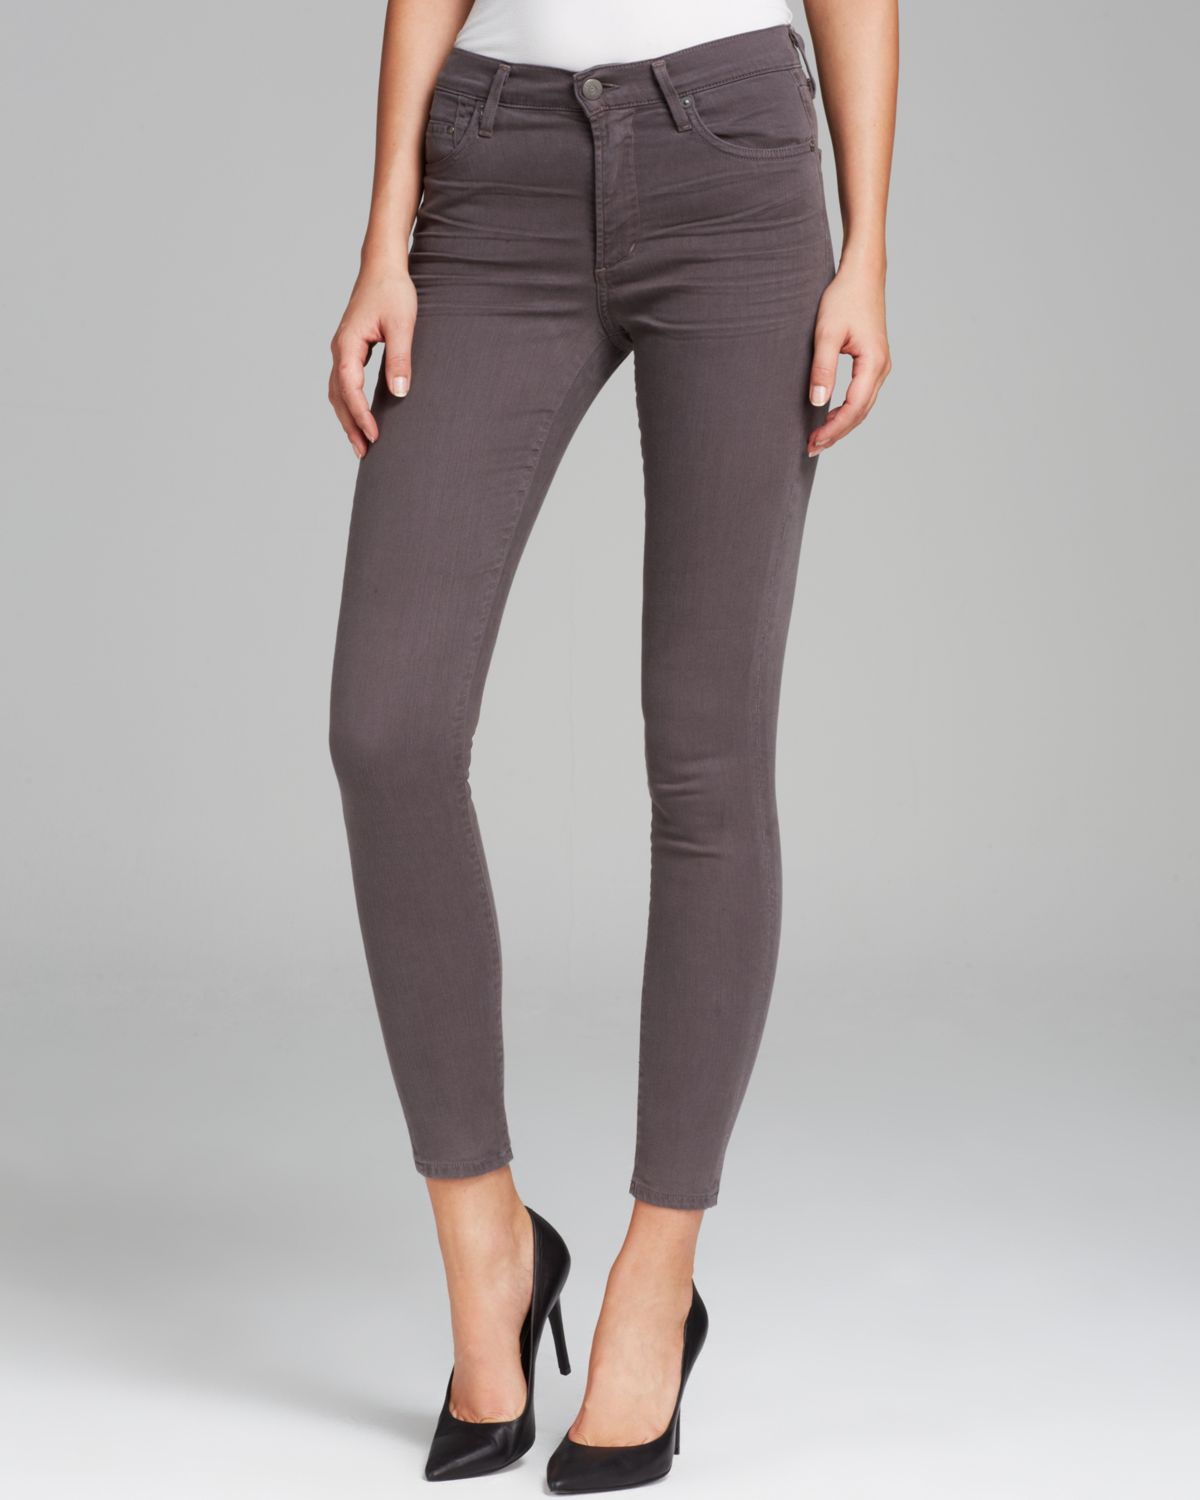 Citizens Of Humanity Jeans Rocket High Rise Skinny in Gaze Grey in Gray ...